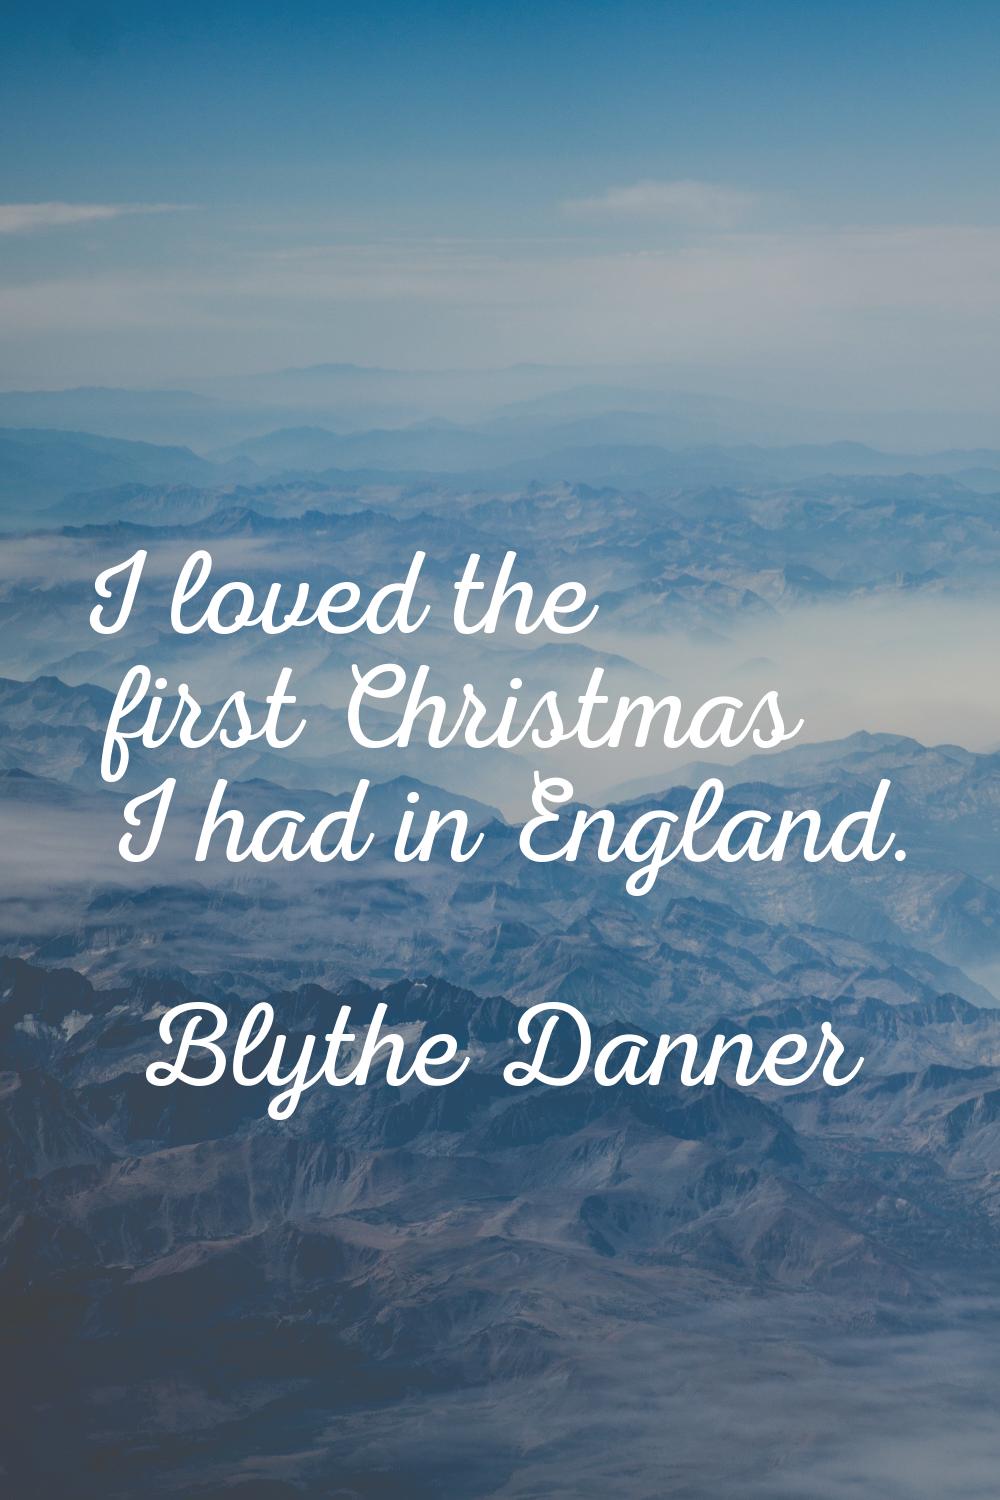 I loved the first Christmas I had in England.